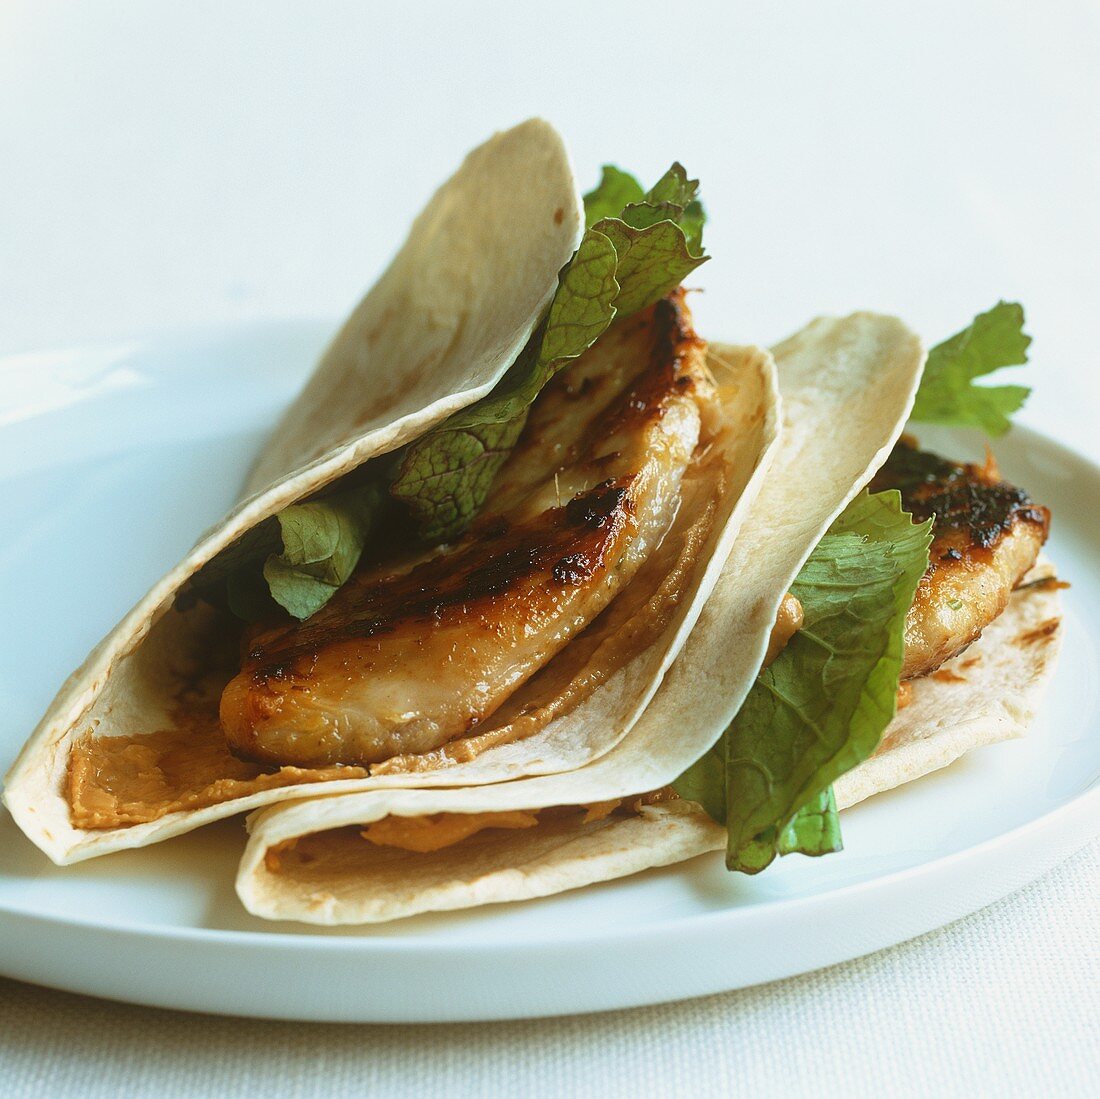 Tortillas filled with chicken breast and cheese